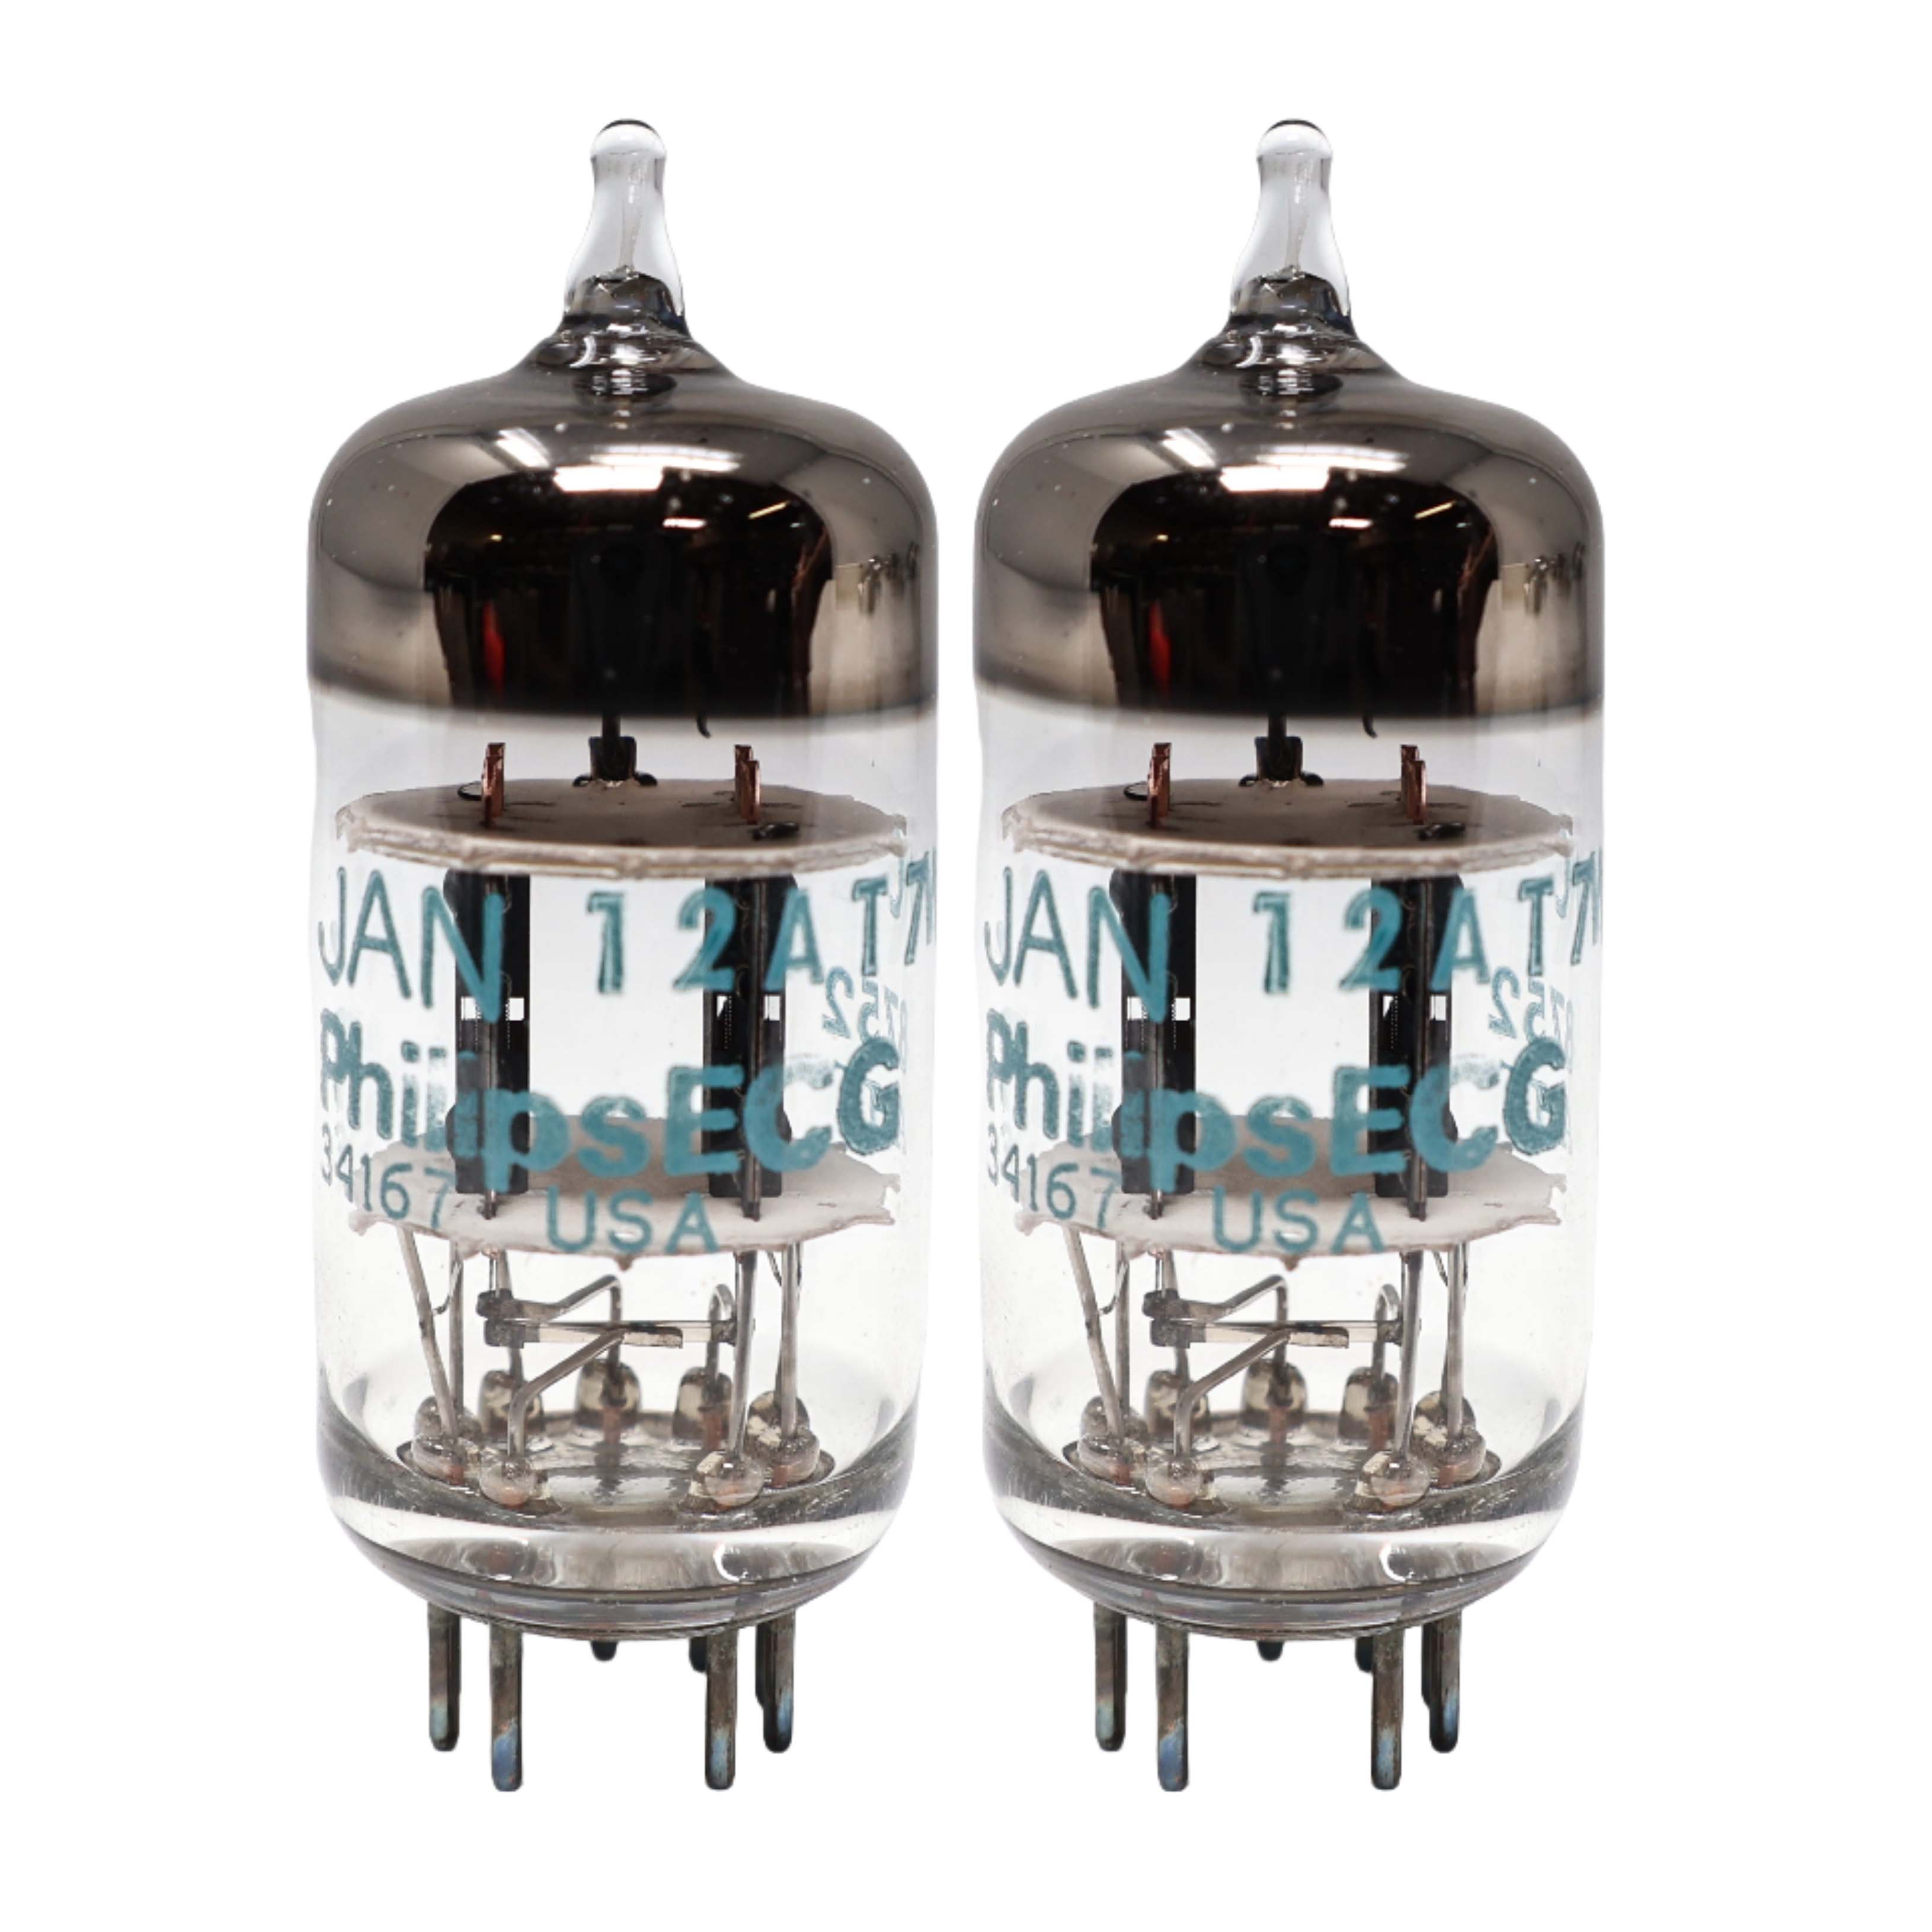 Jan Philips 12AT7WC Preamp Vacuum tube matched pair